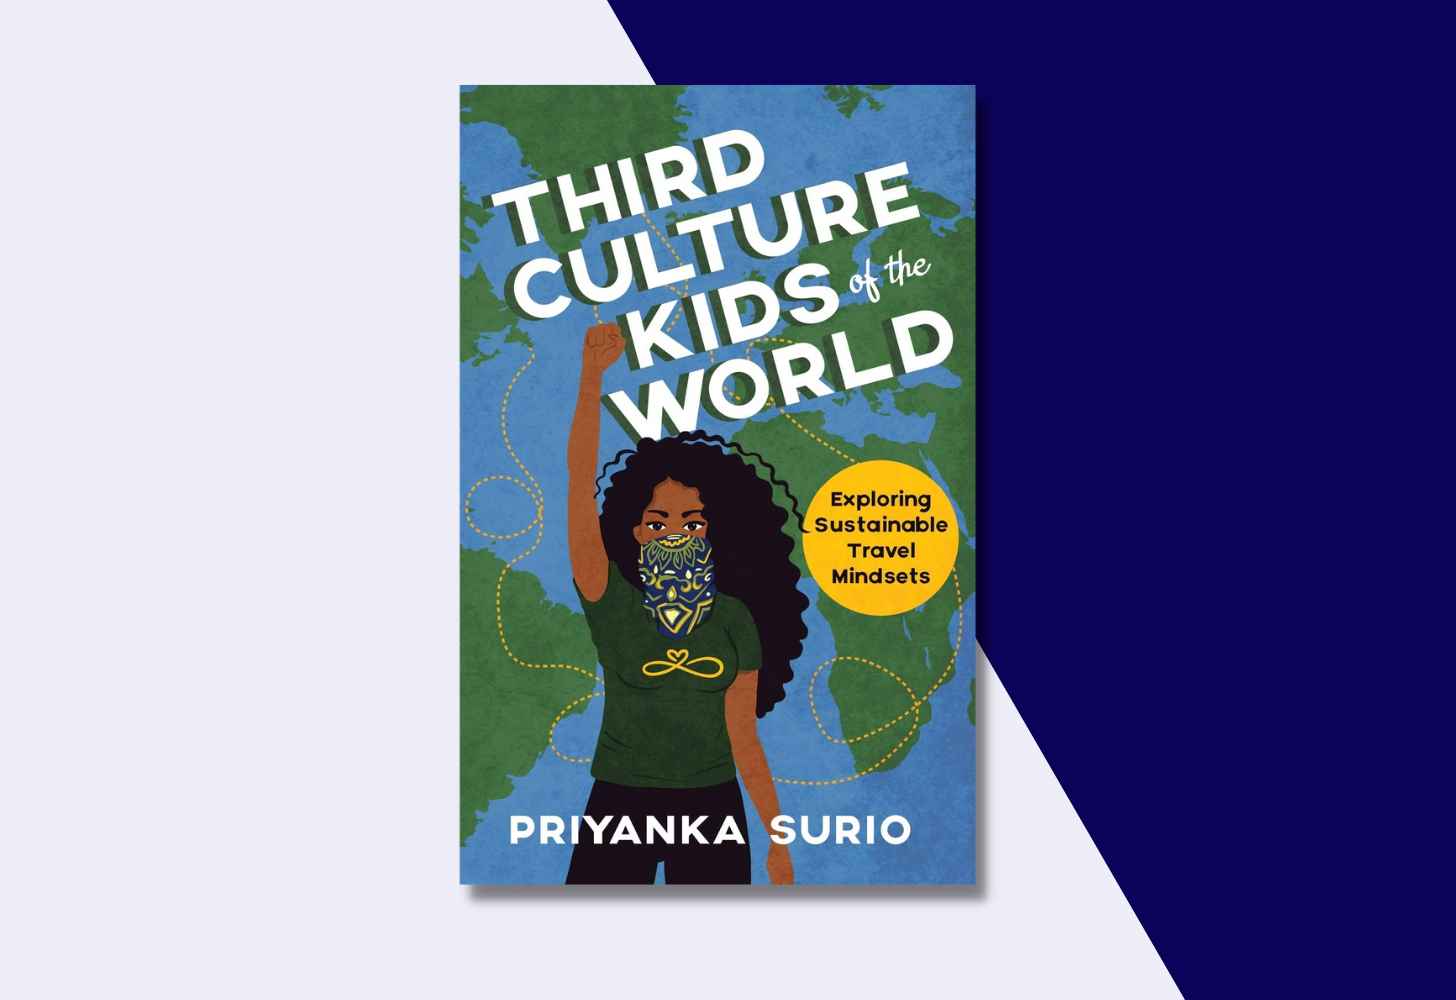 The Cover Of “Third Culture Kids of the World: Exploring Sustainable Travel Mindsets” by Priyanka Surio